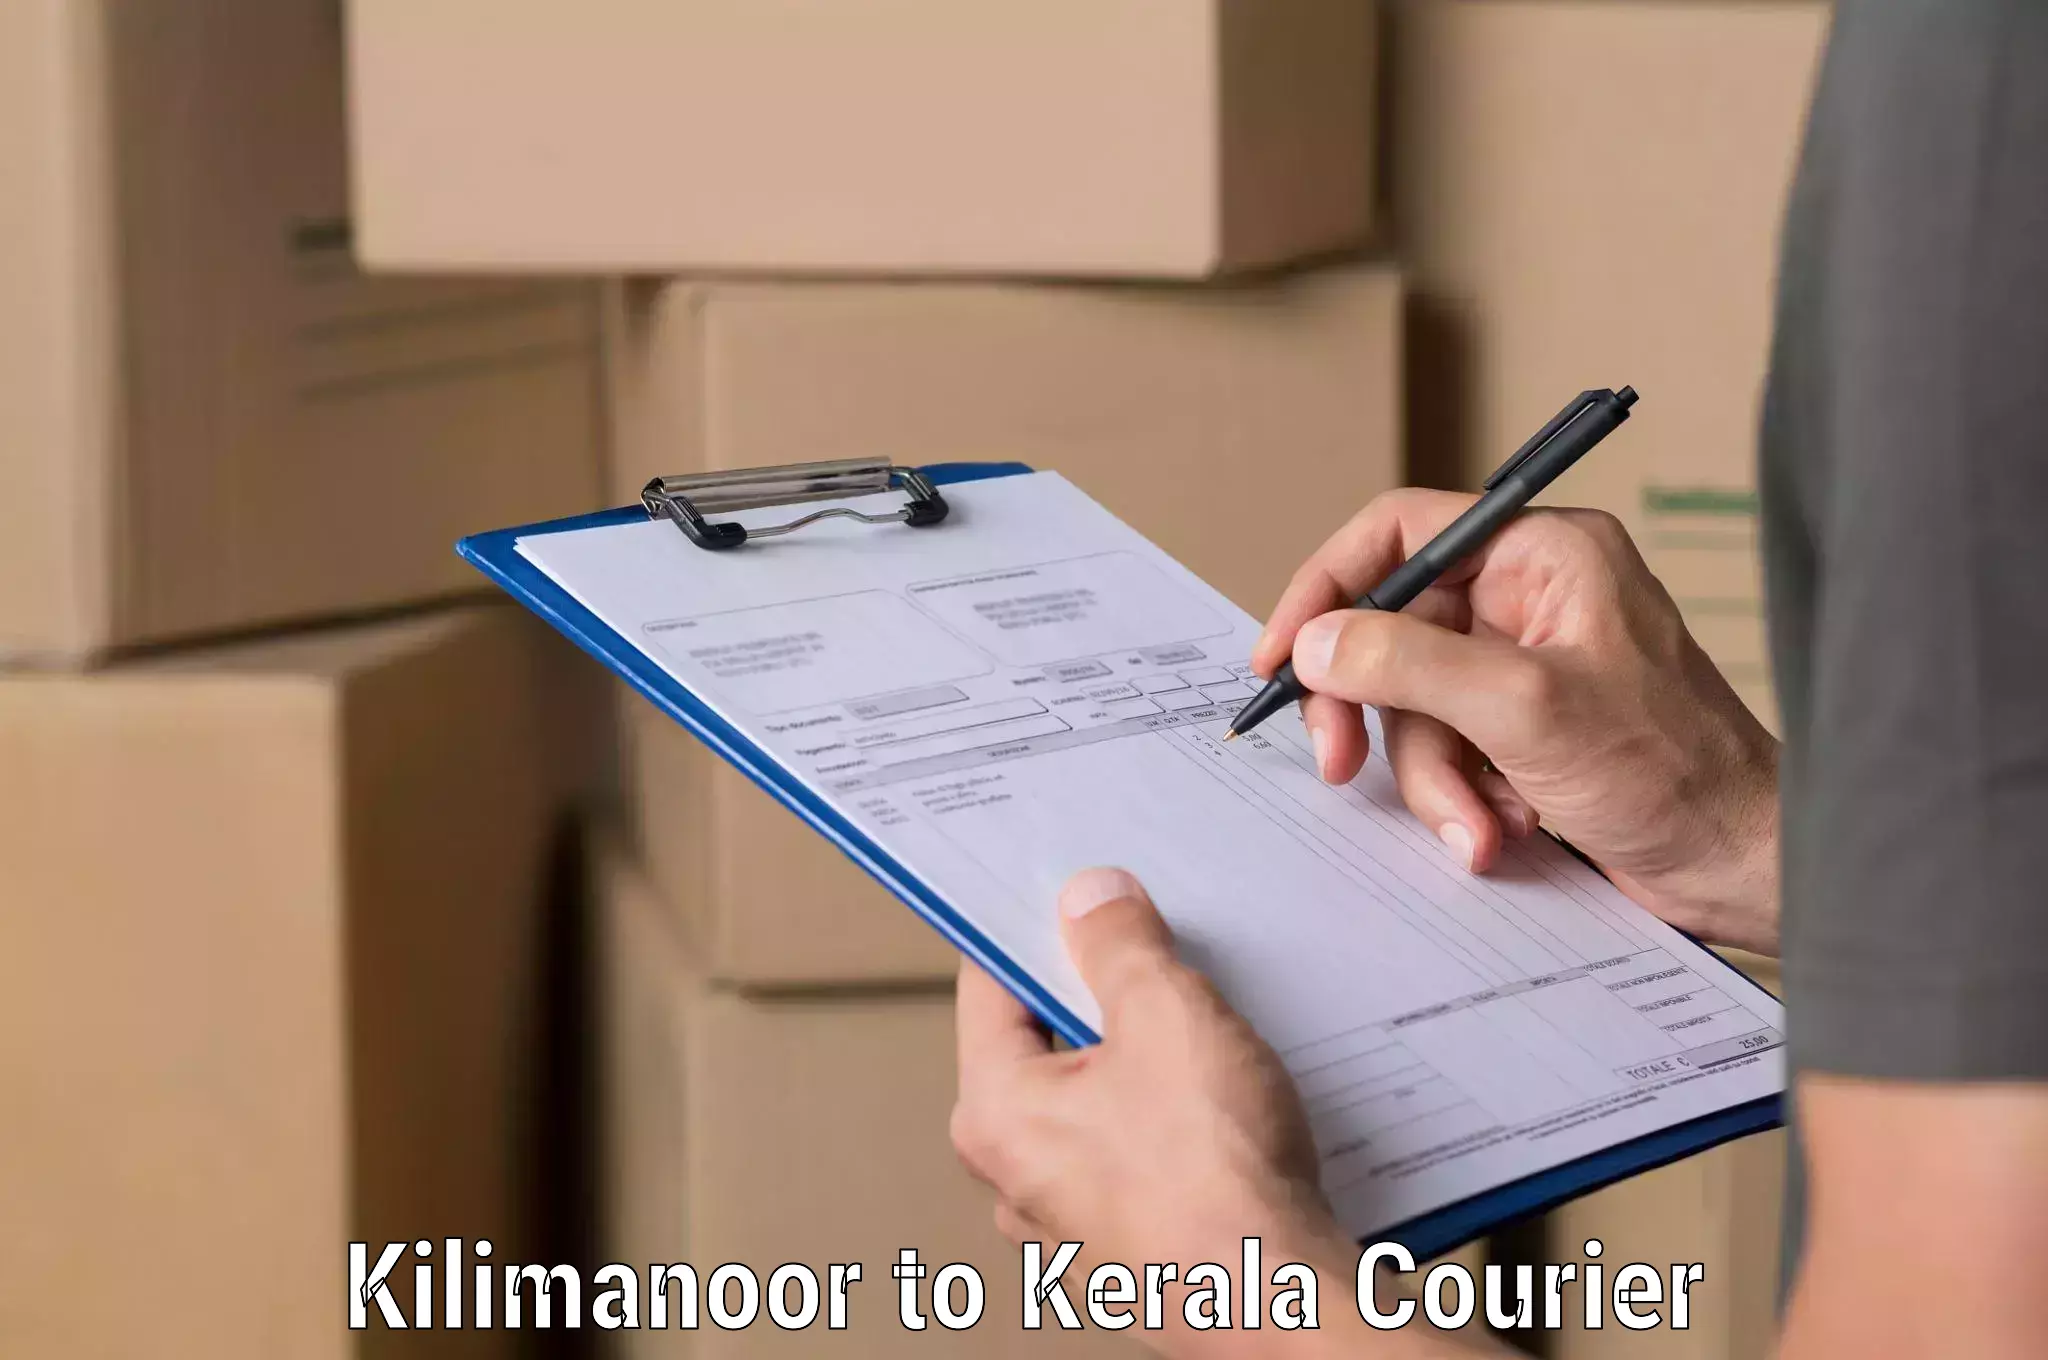 Express package transport Kilimanoor to Cochin Port Kochi